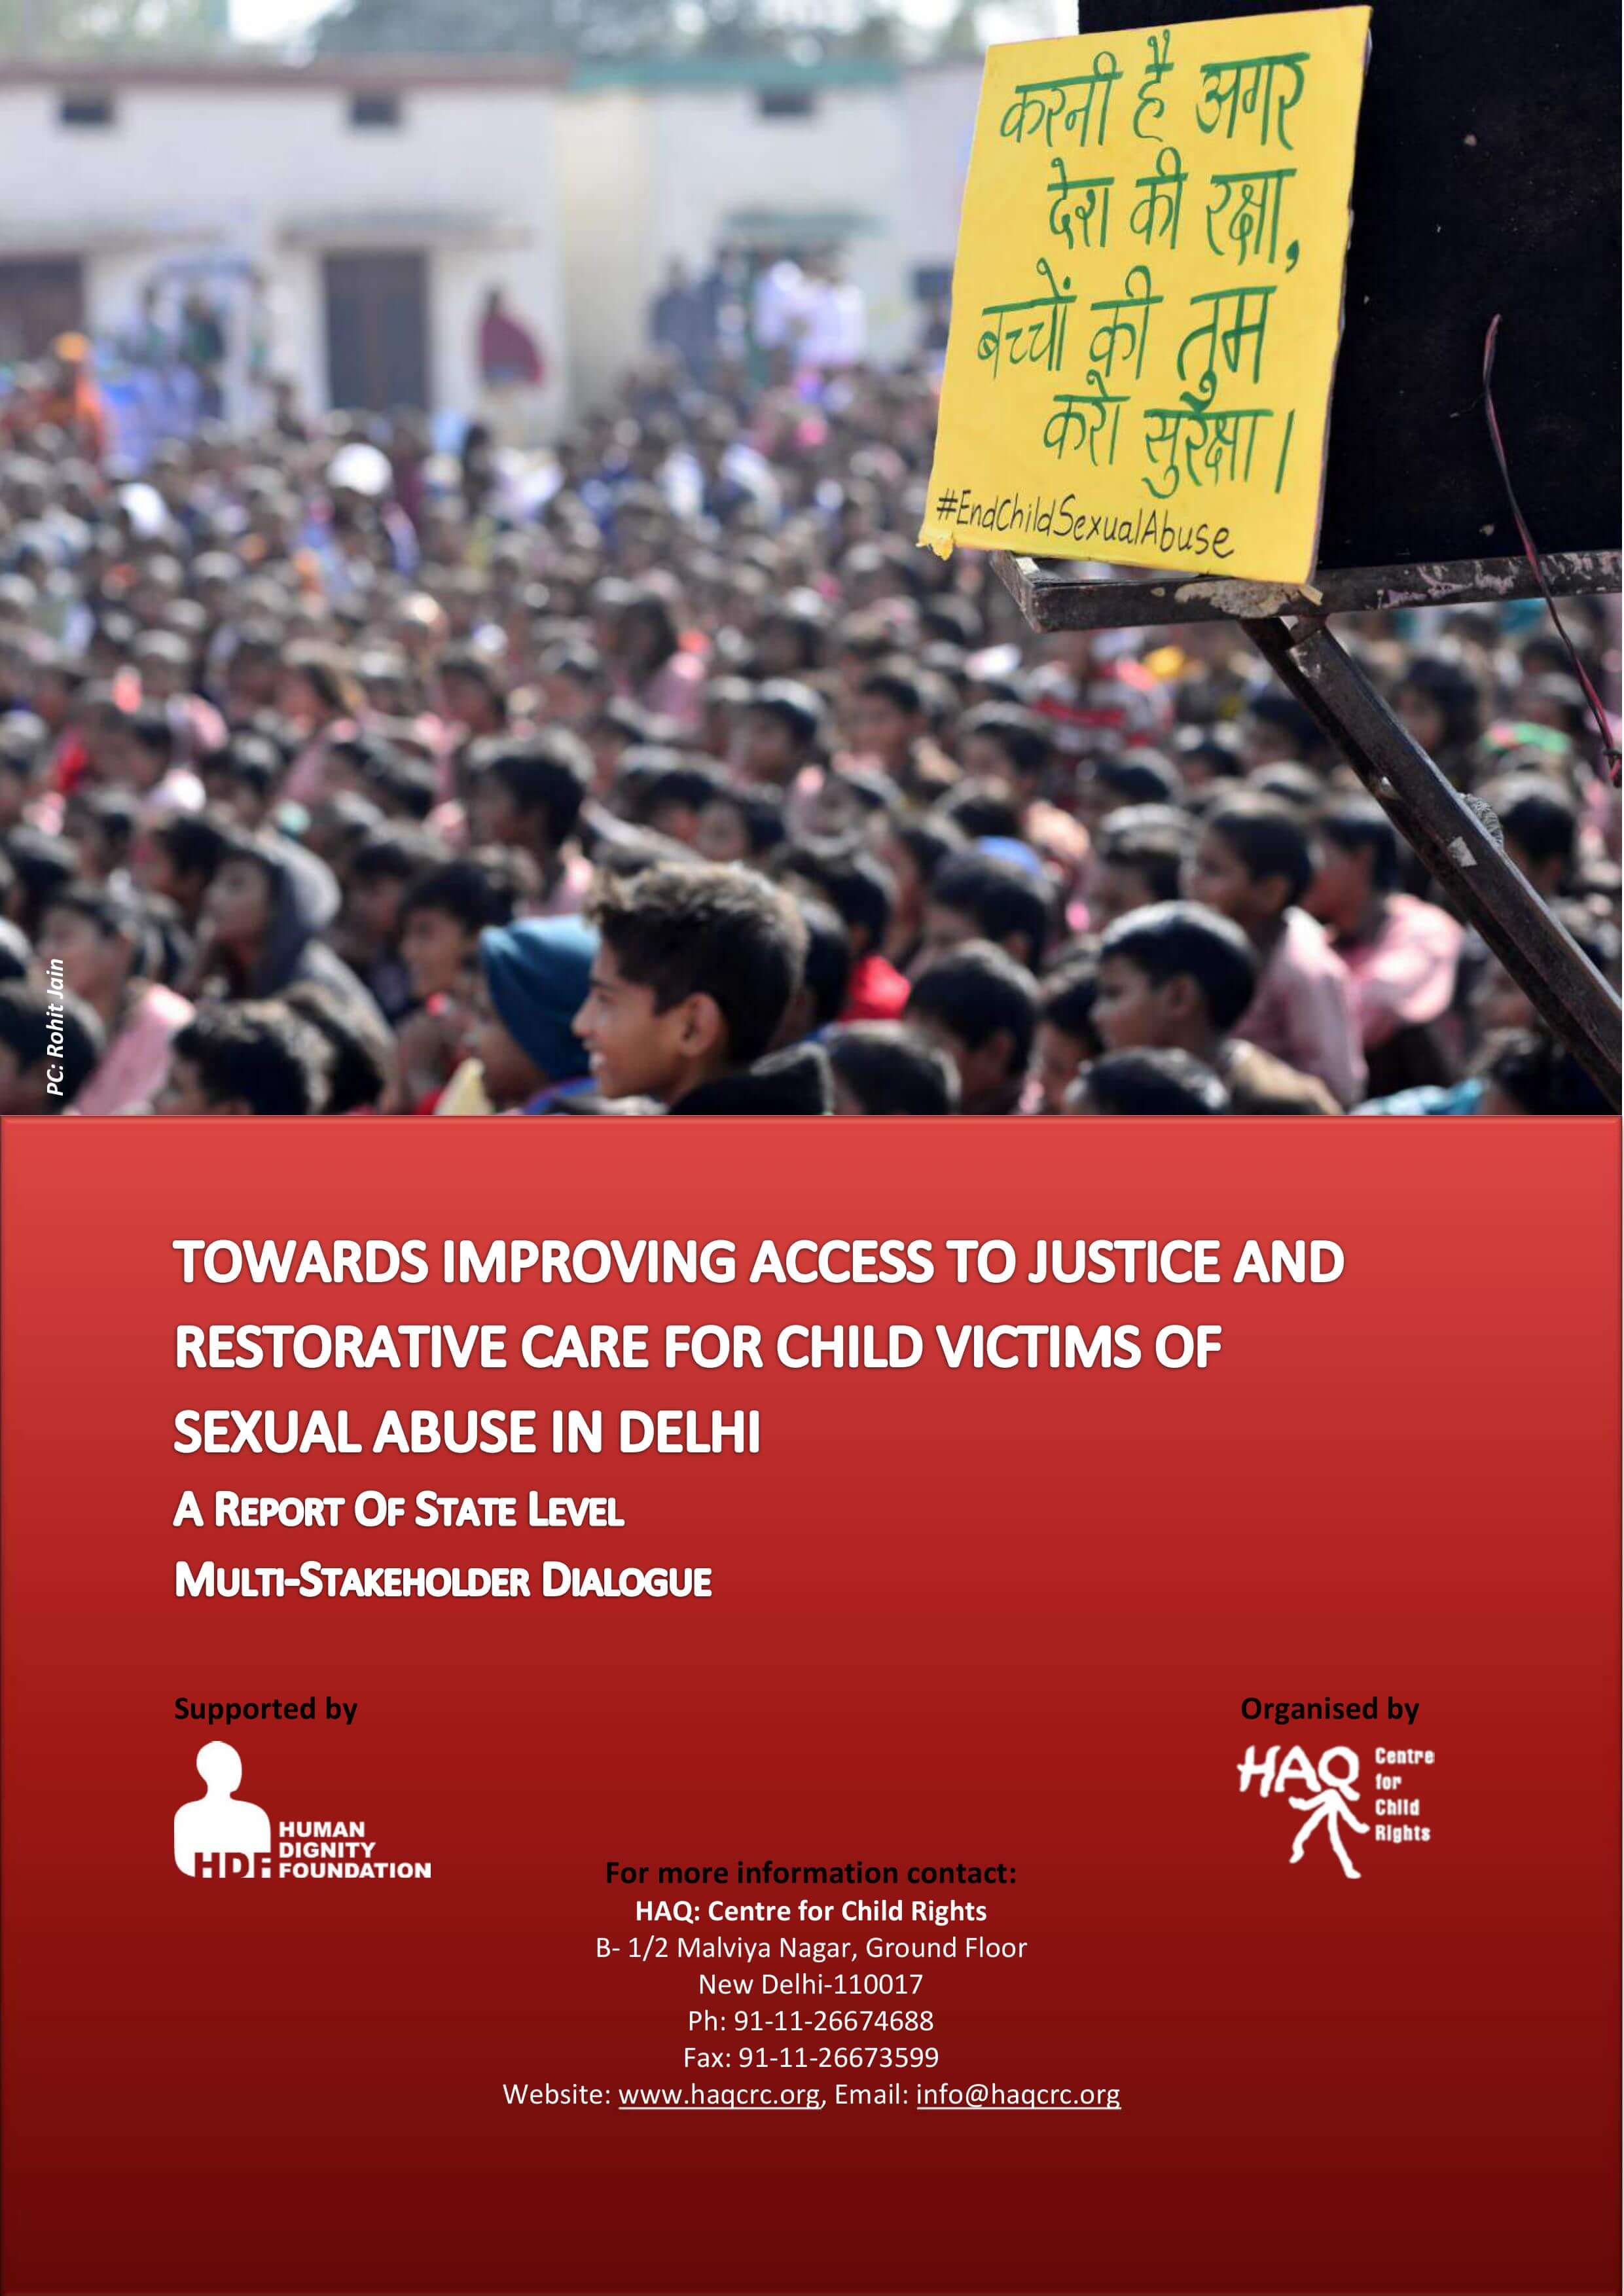 Report of Multi-Stakeholder Dialogue on Improving Access to Justice and Restorative Care for Victims of Child Sexual Abuse